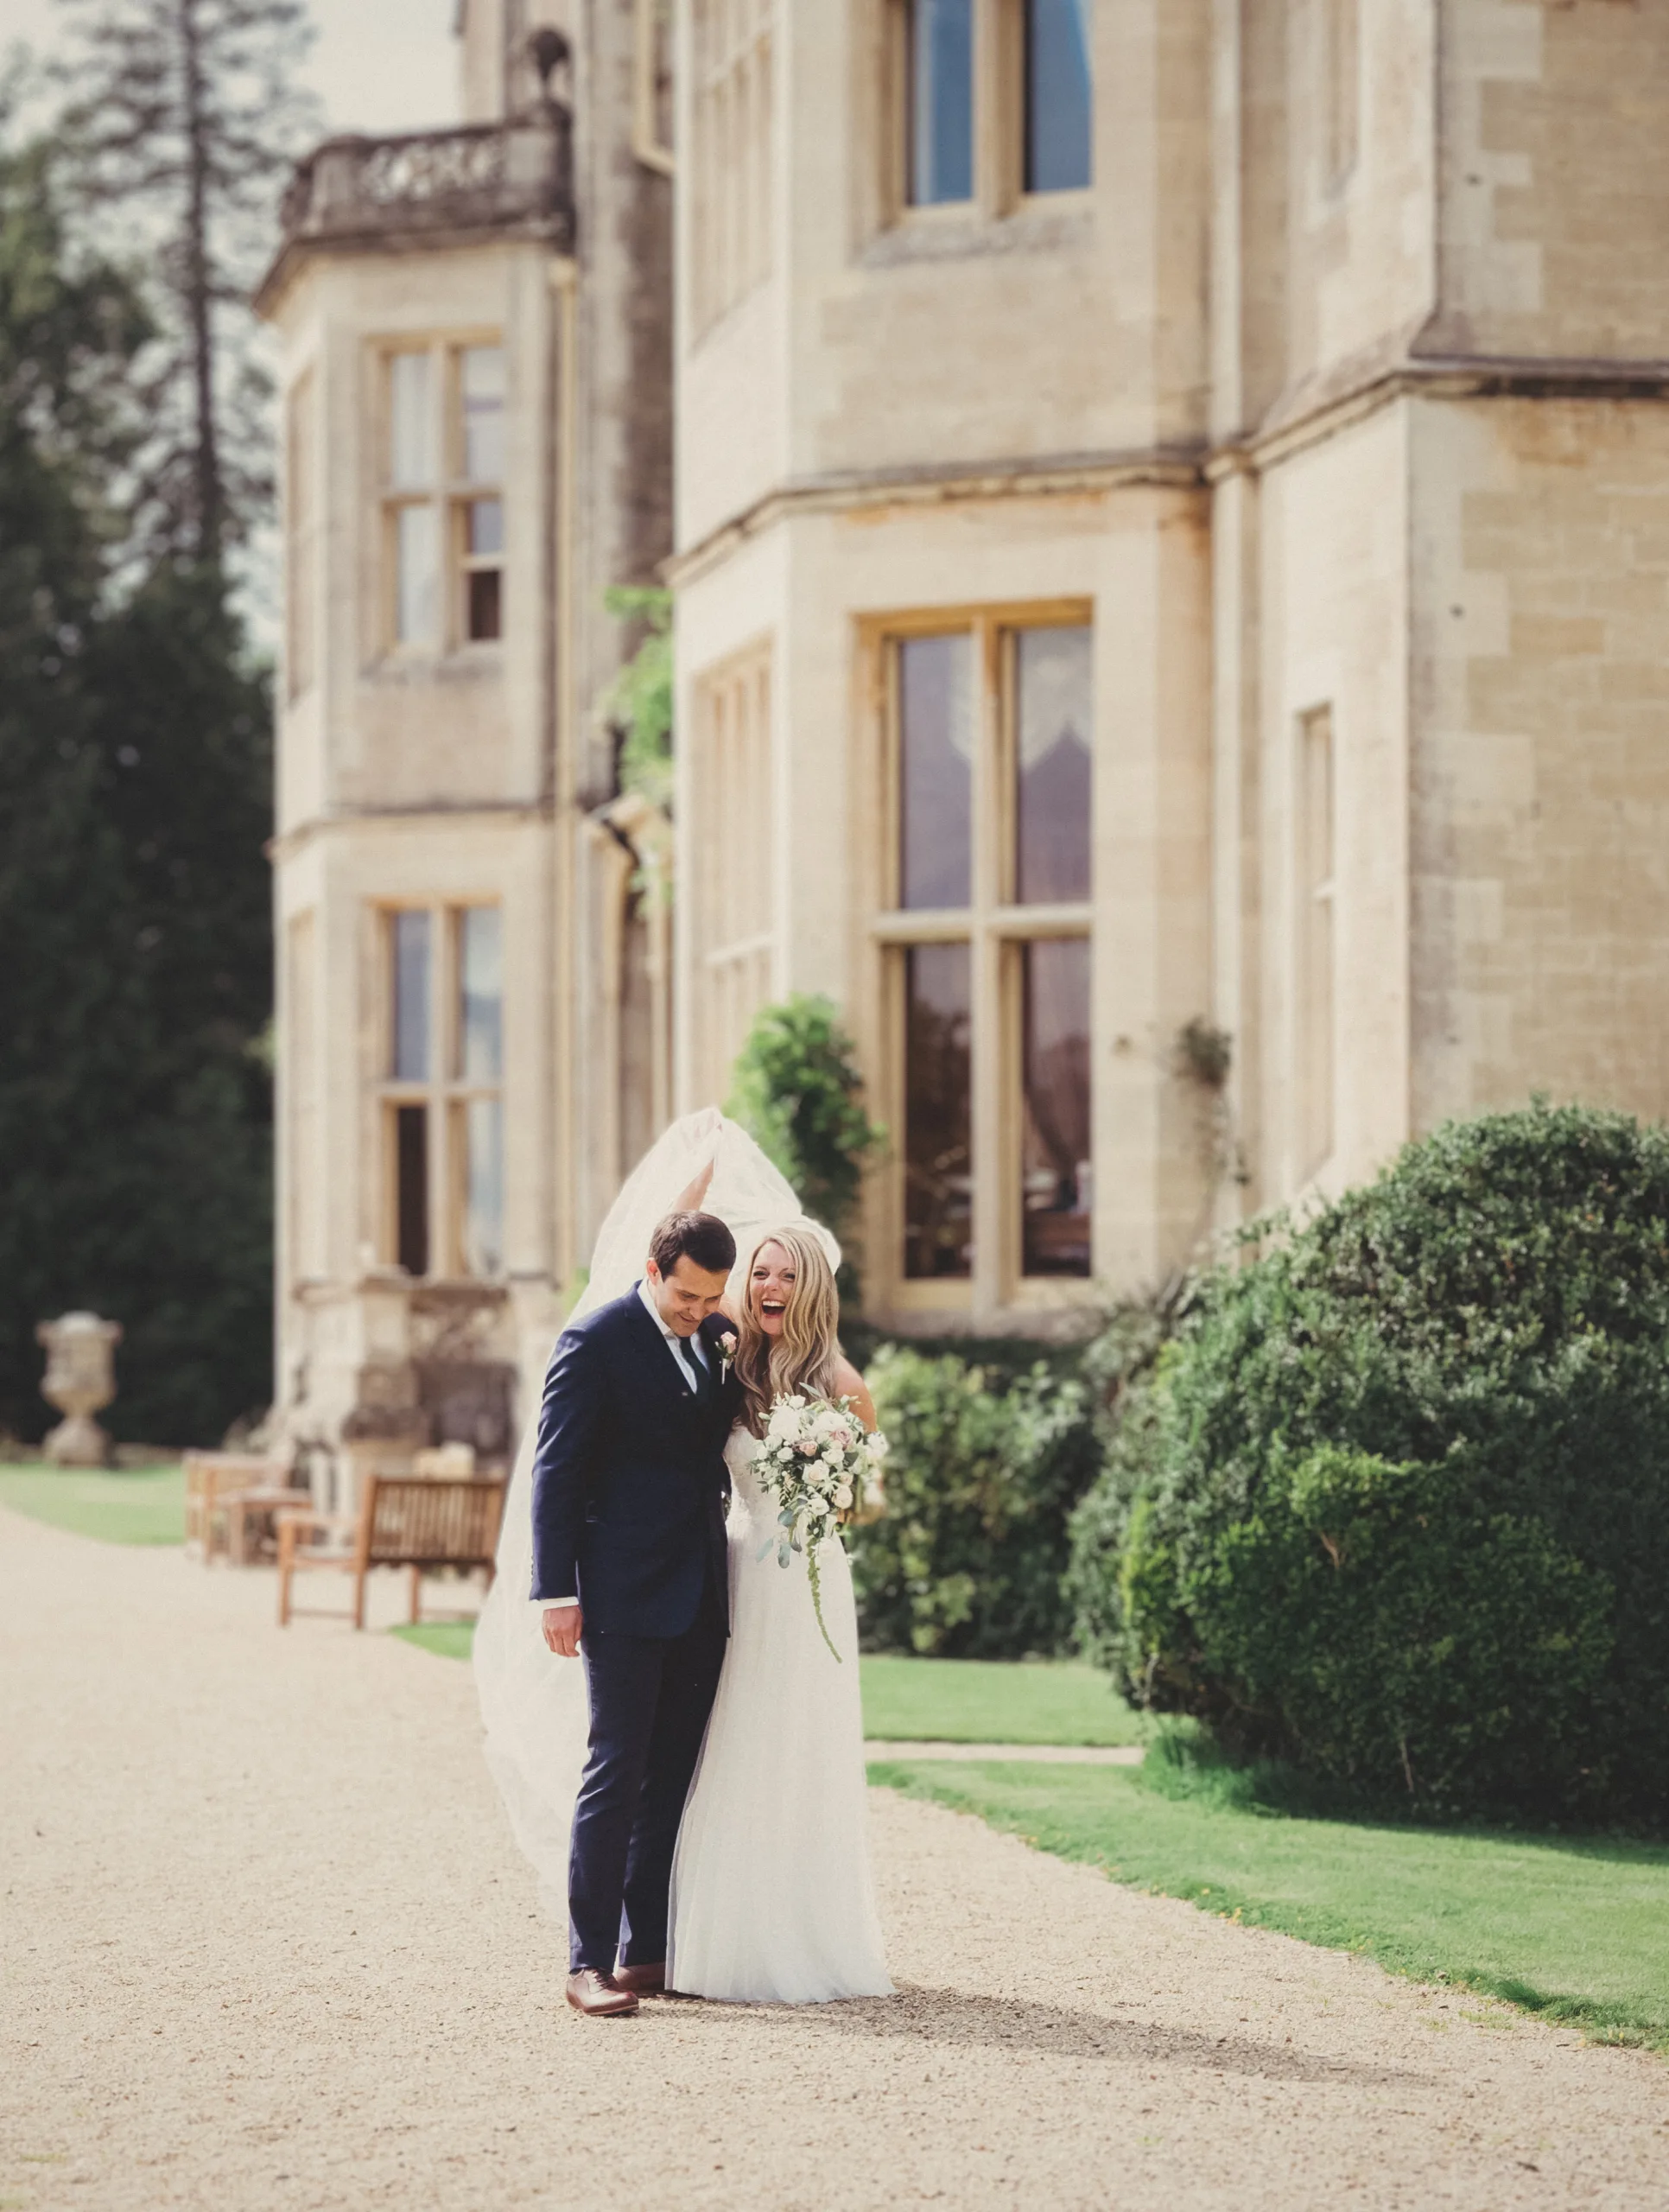 Church or Civil Weddings: uk marriages :a bride and groom standing in front of a large building.